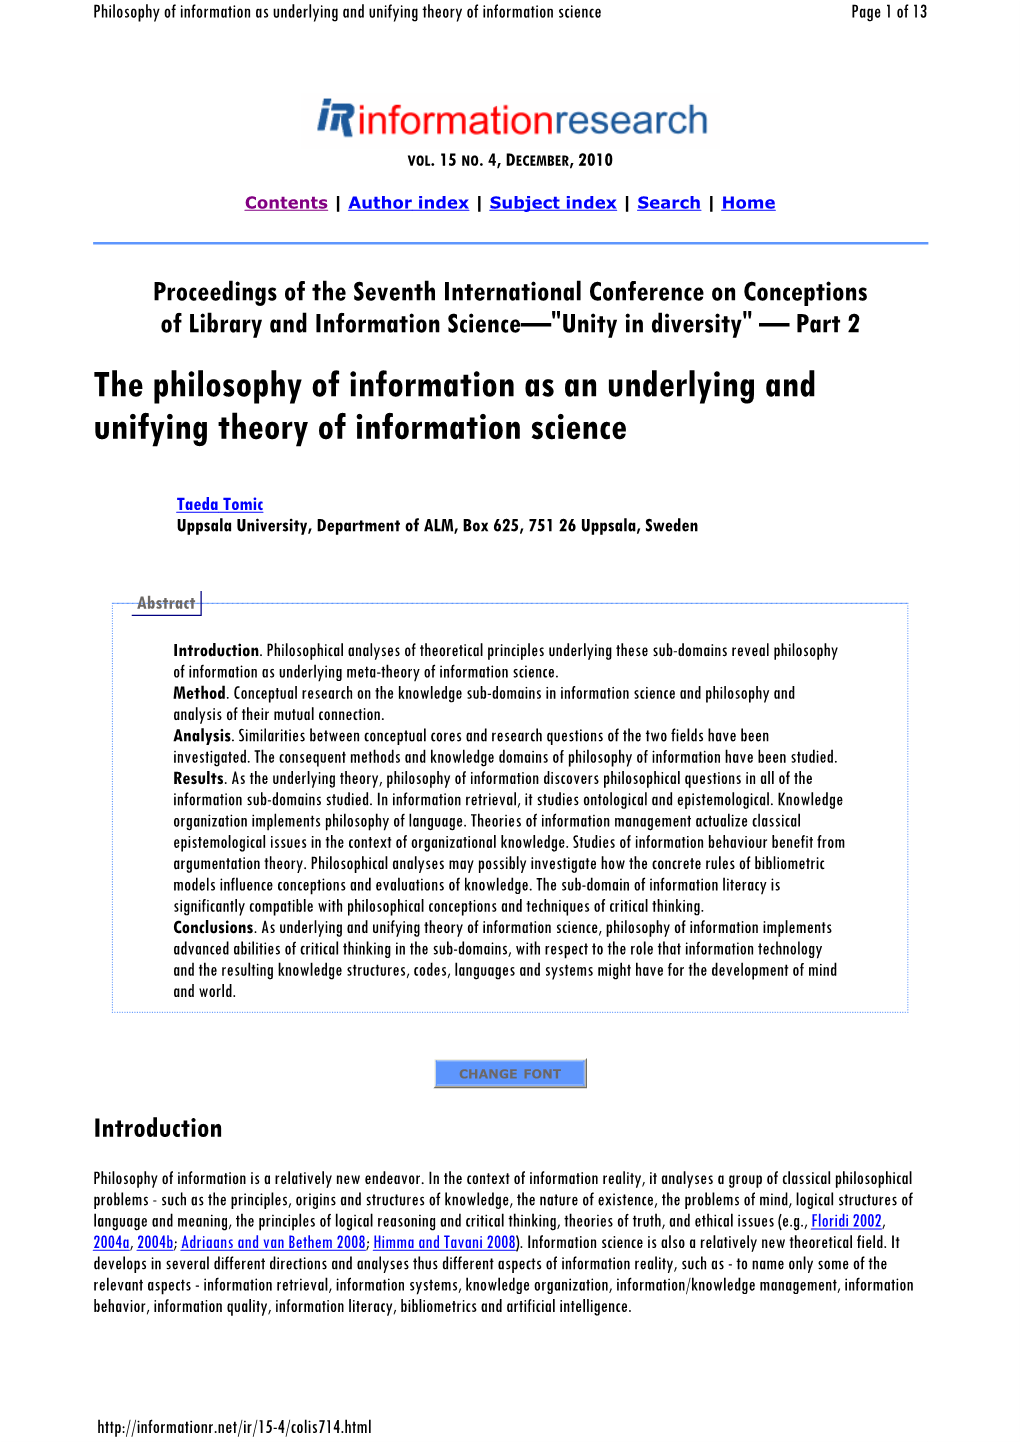 The Philosophy of Information As an Underlying and Unifying Theory of Information Science